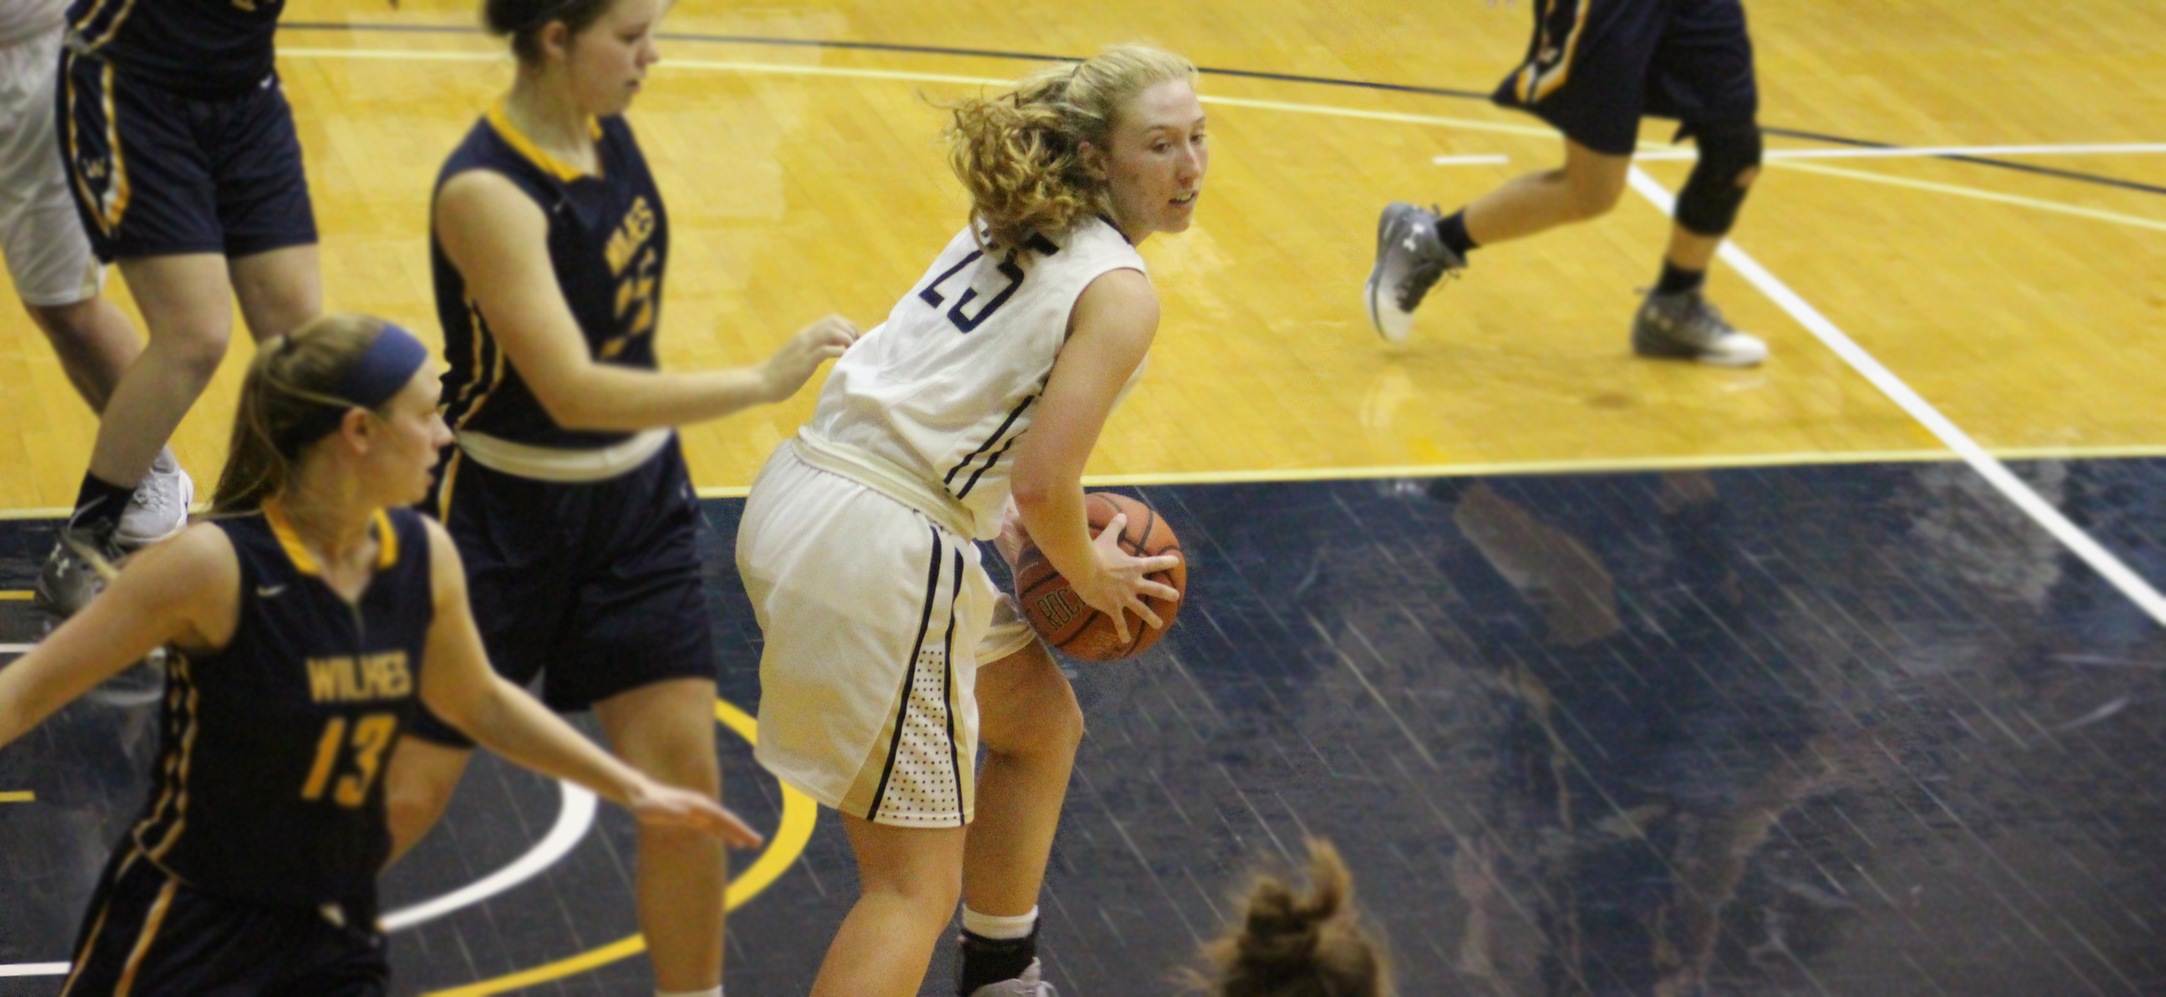 Juniata Ends 2016 With 71-68 Win Over DeSales